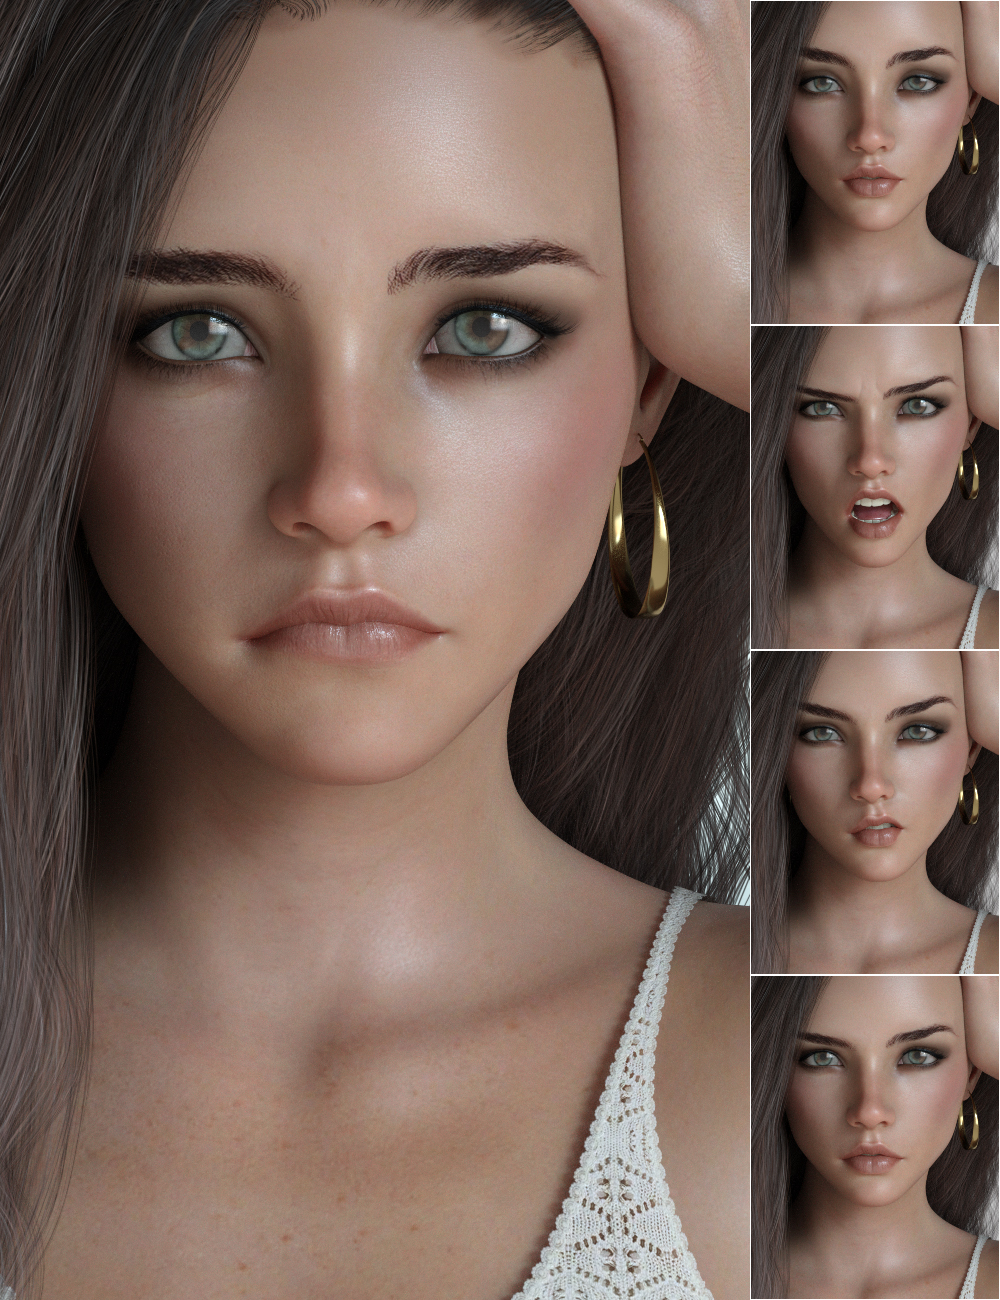 P3D Get Real Expressions for Genesis 8 Female(s) by: P3Design, 3D Models by Daz 3D